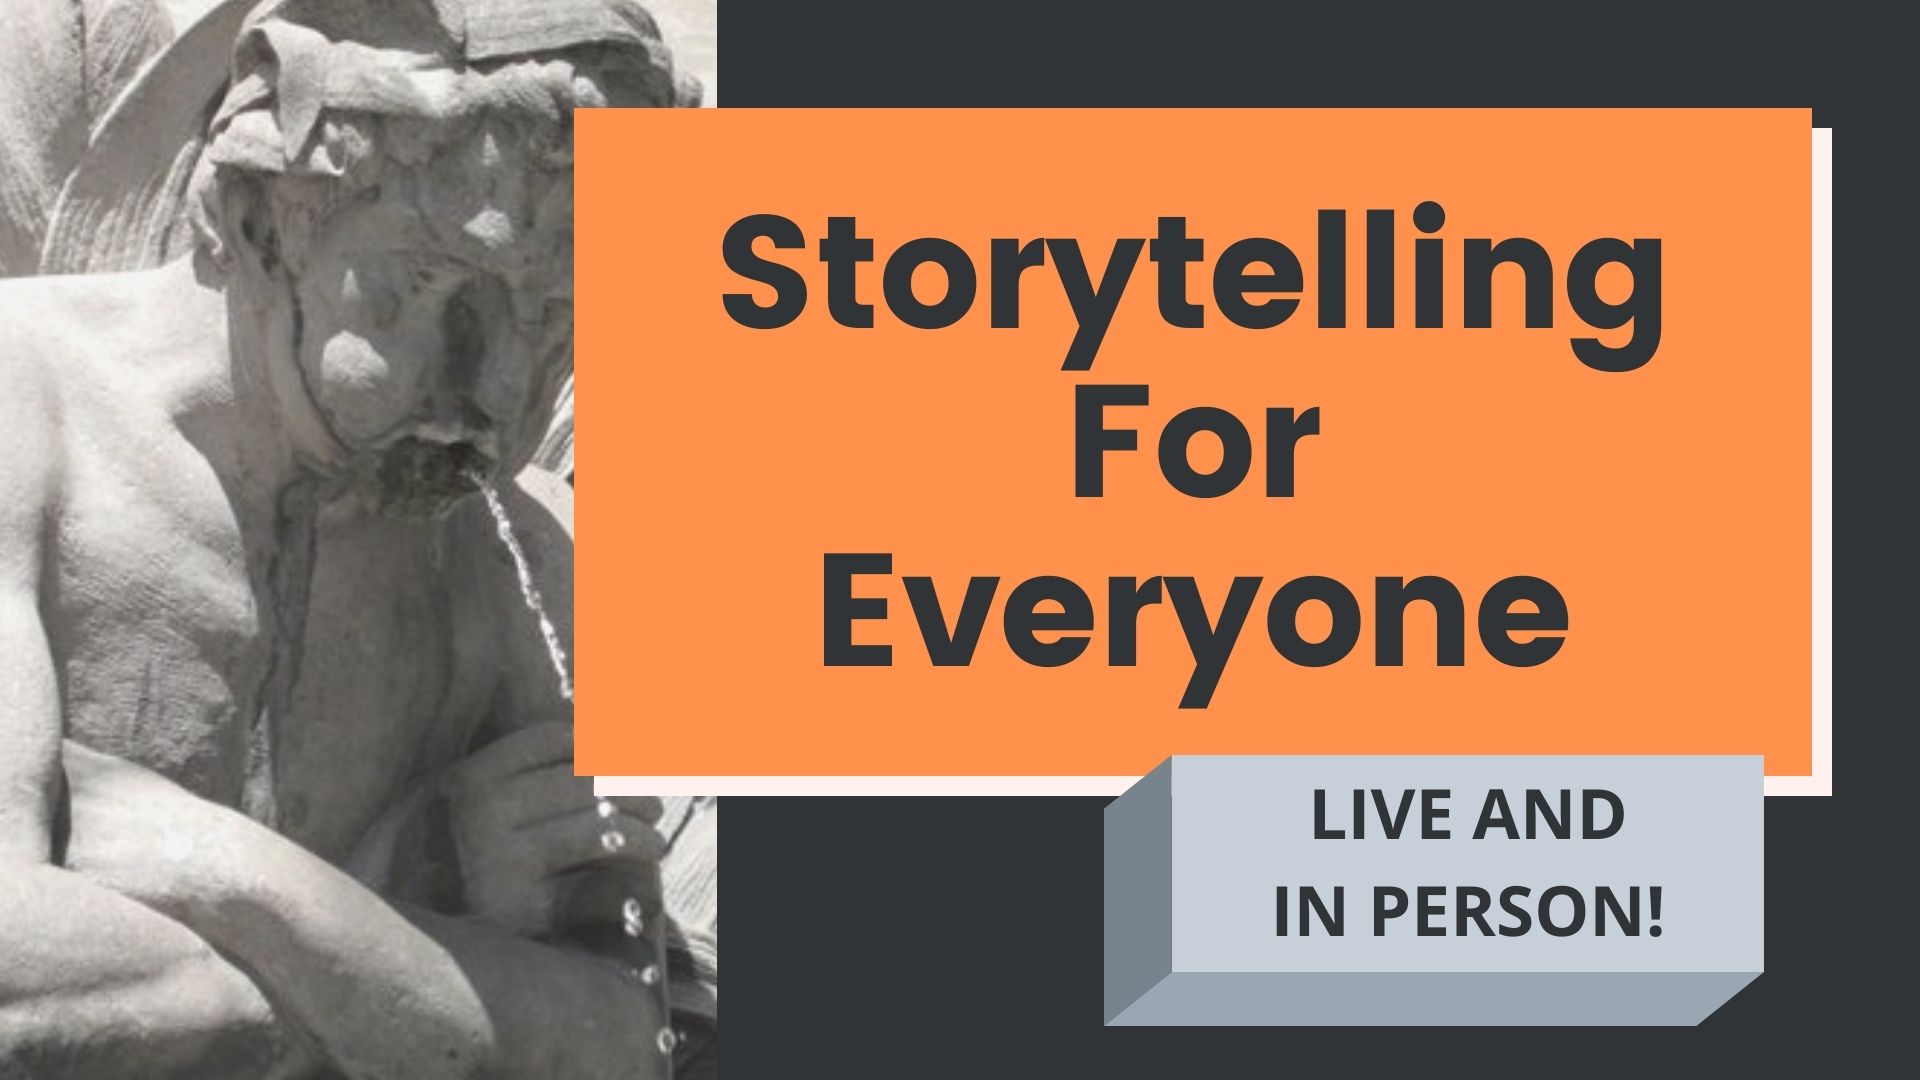 Storytelling For Everyone: Four Week Course in Personal Narrative (Mondays in March)